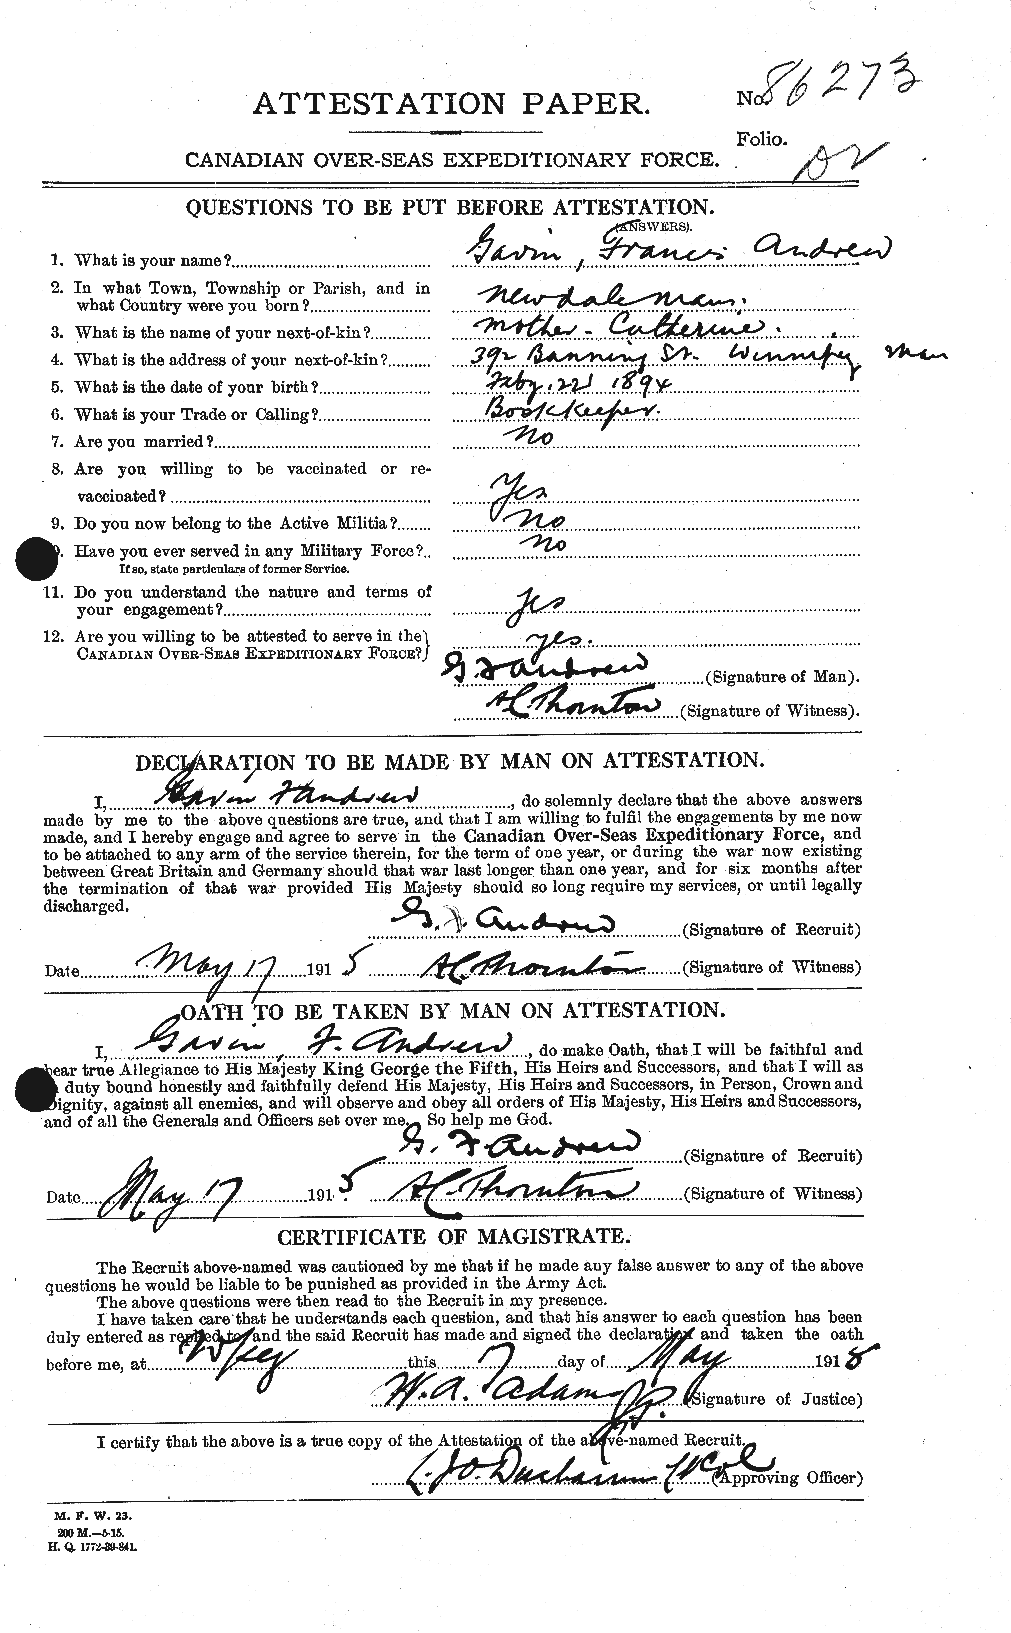 Personnel Records of the First World War - CEF 210540a